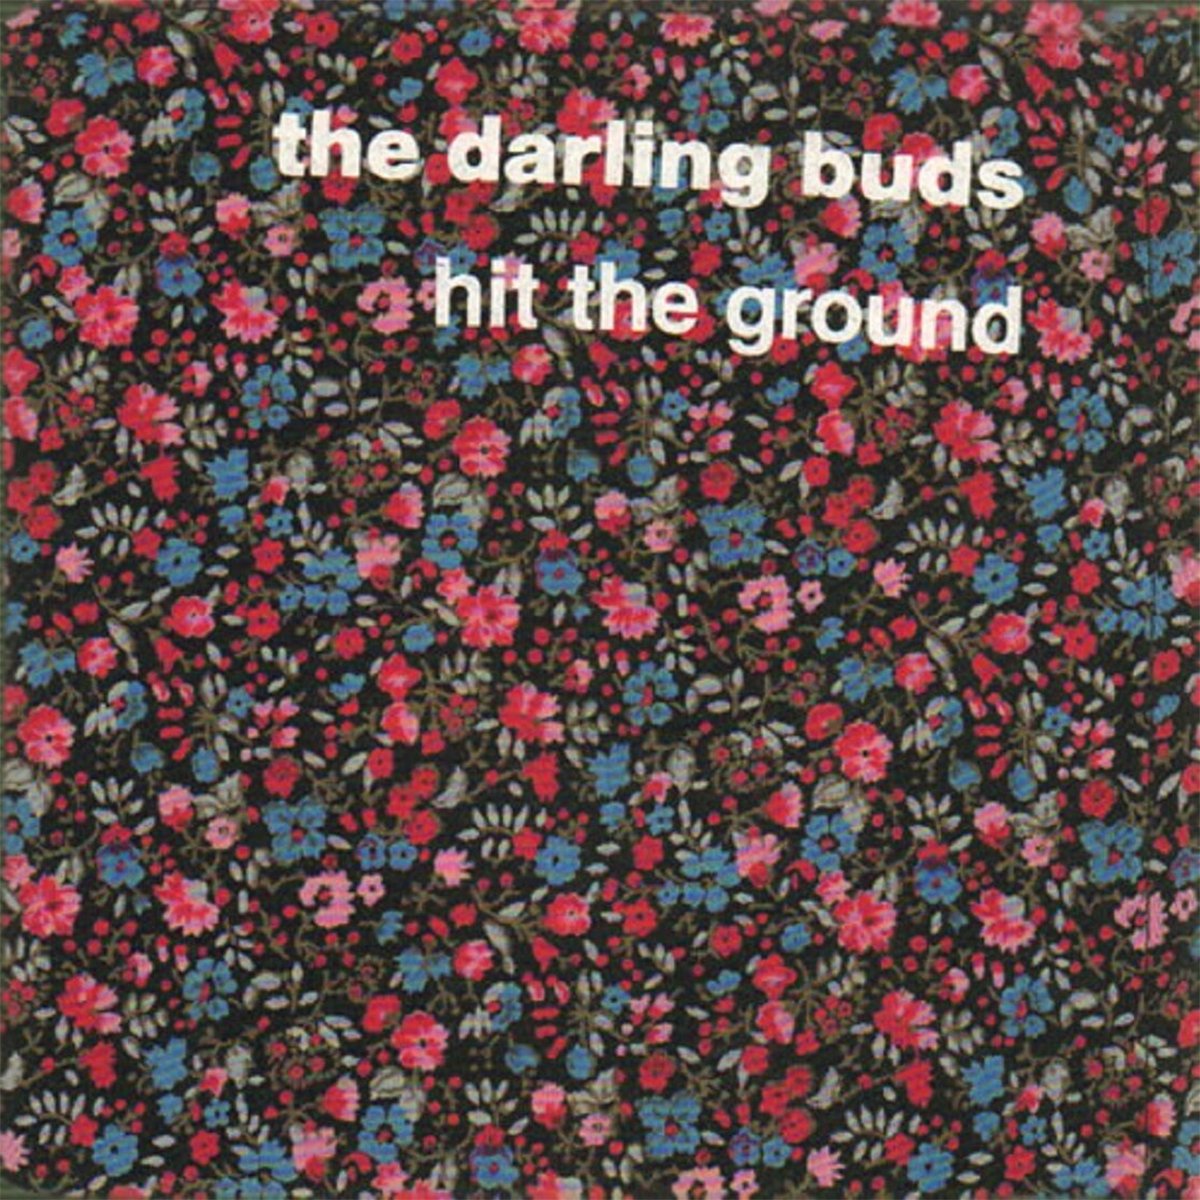 playing DARLING BUDS, THE 'Hit The Ground' facebook.com/TheDarlingBuds… @theedarlingbuds #BBCIntroducingOnRadioWales #BehindTheTrack [thanks Andrea!]